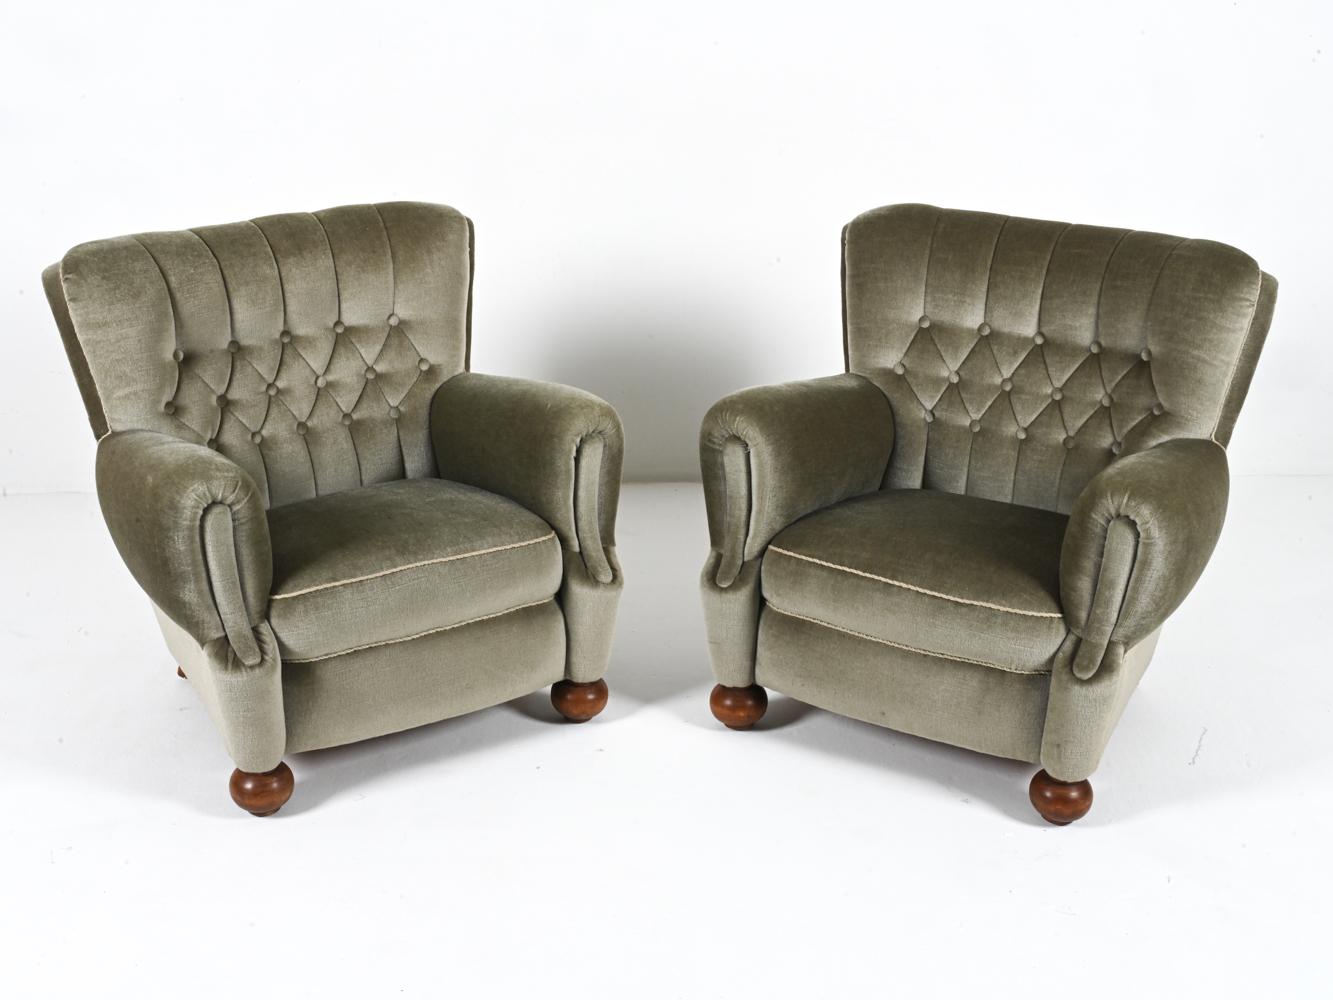 This fabulous pair of Early Modern club chairs features a subtle winged silhouette, with rolled slope arms and bun-style front feet. They are expertly finished in a luxurious sage green mohair, with diamond-tufted backs that give extra texture and